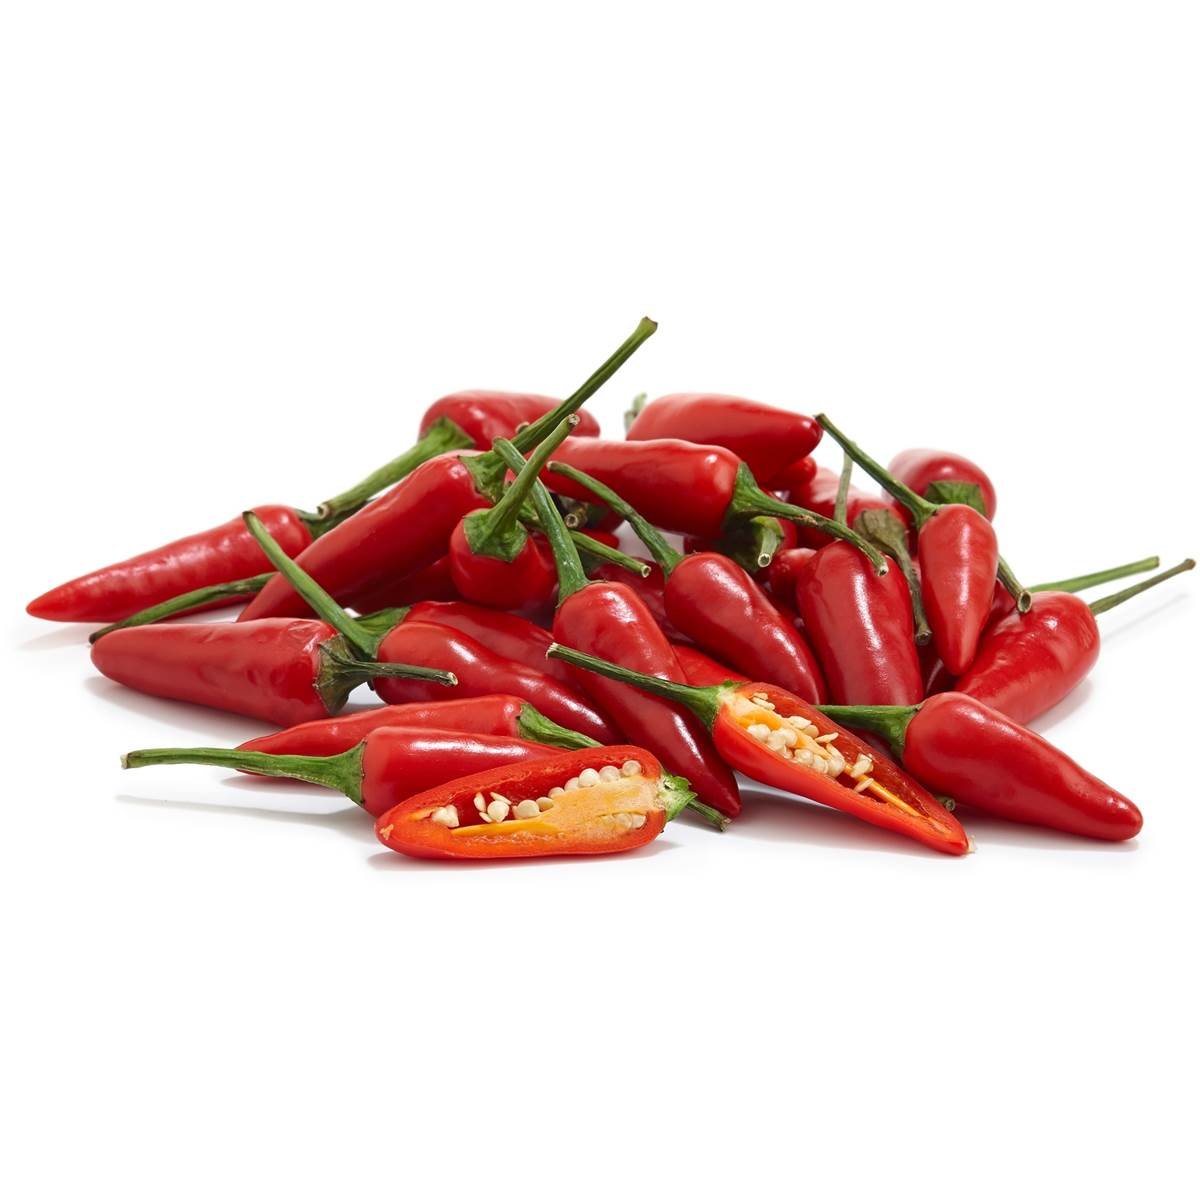 pau-signs-commercialisation-agreement-for-hybrid-chilli-variety